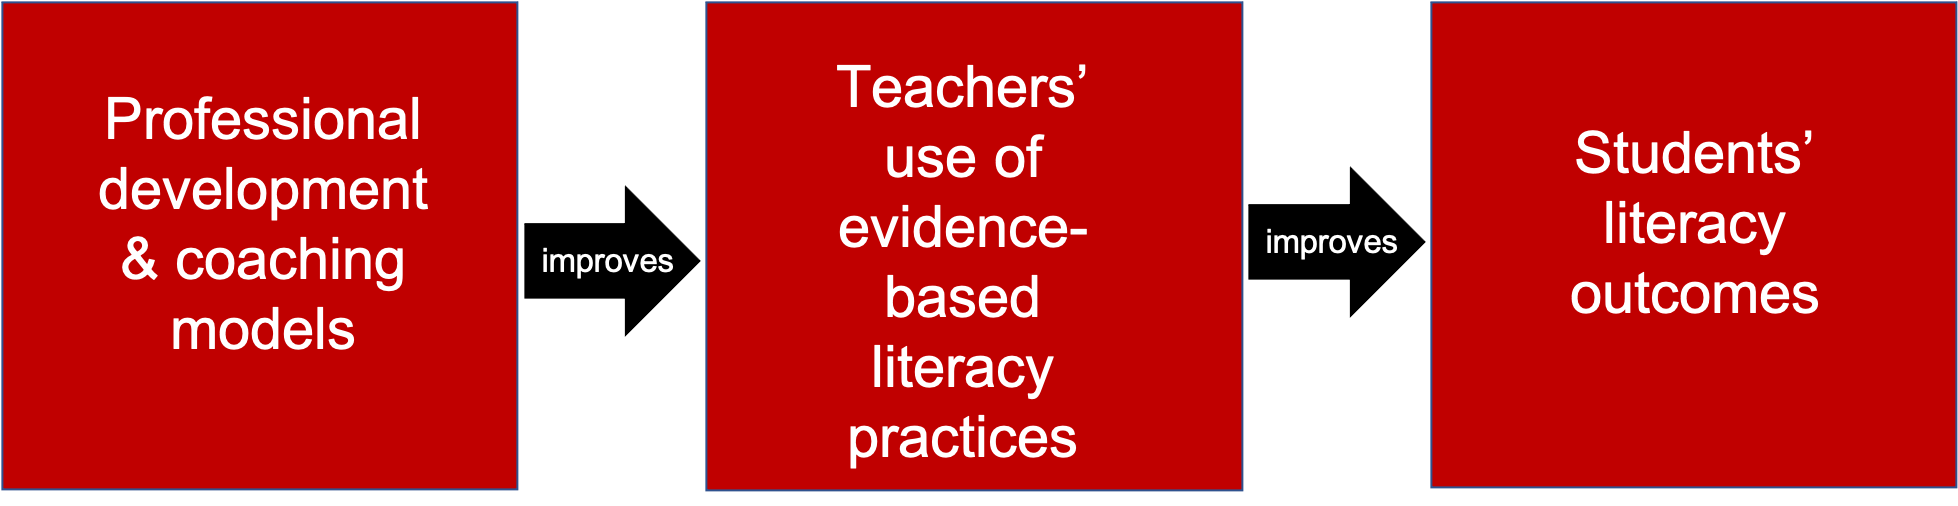 PD and coaching impacts teaching which impacts student achievement